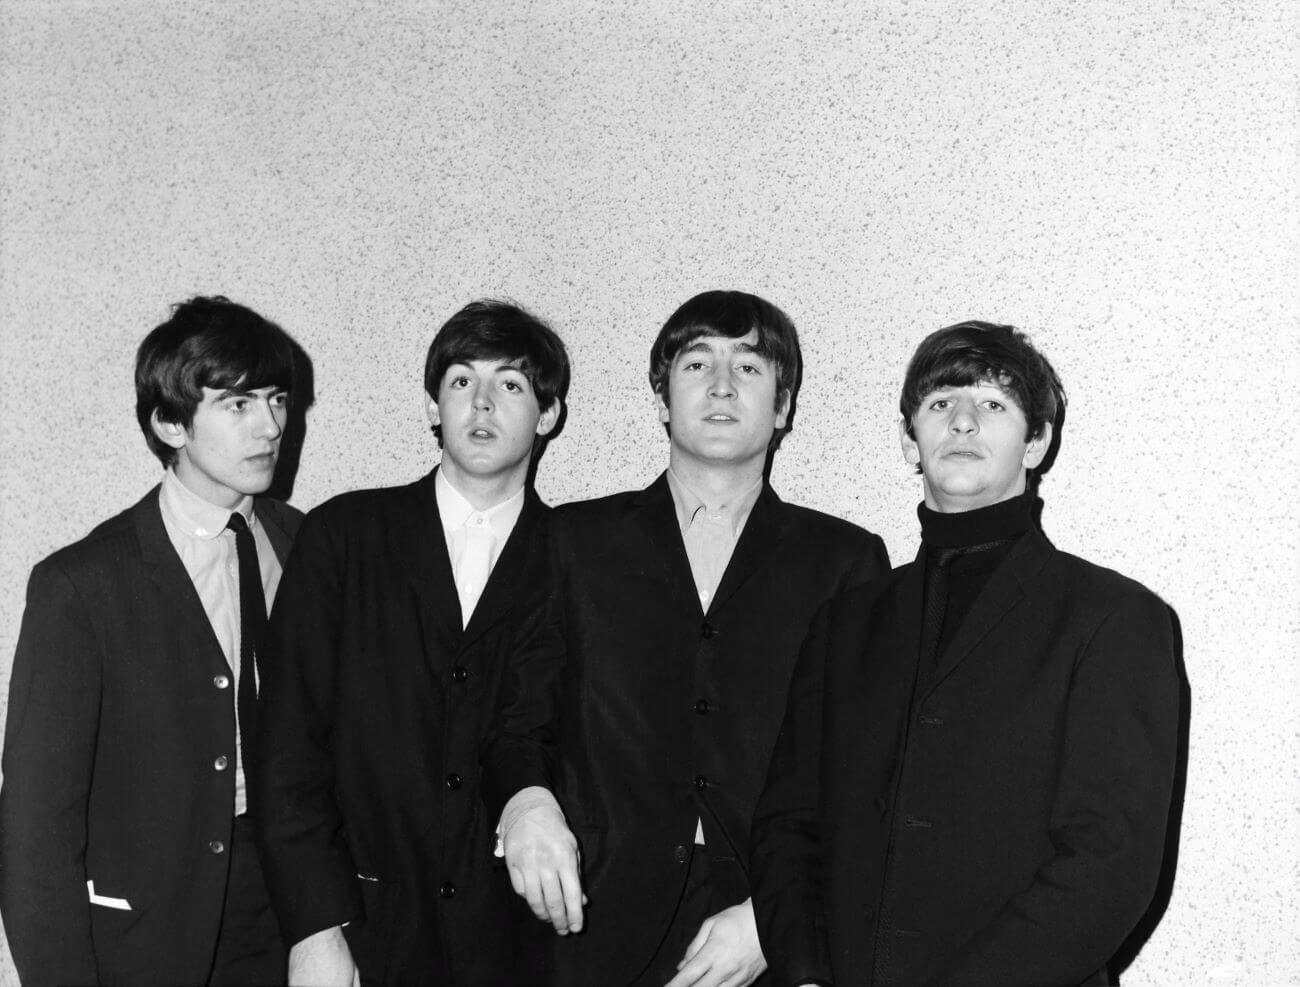 A black and white picture of George Harrison, Paul McCartney, John Lennon, and Ringo Starr of The Beatles wearing black and posing against a white wall.